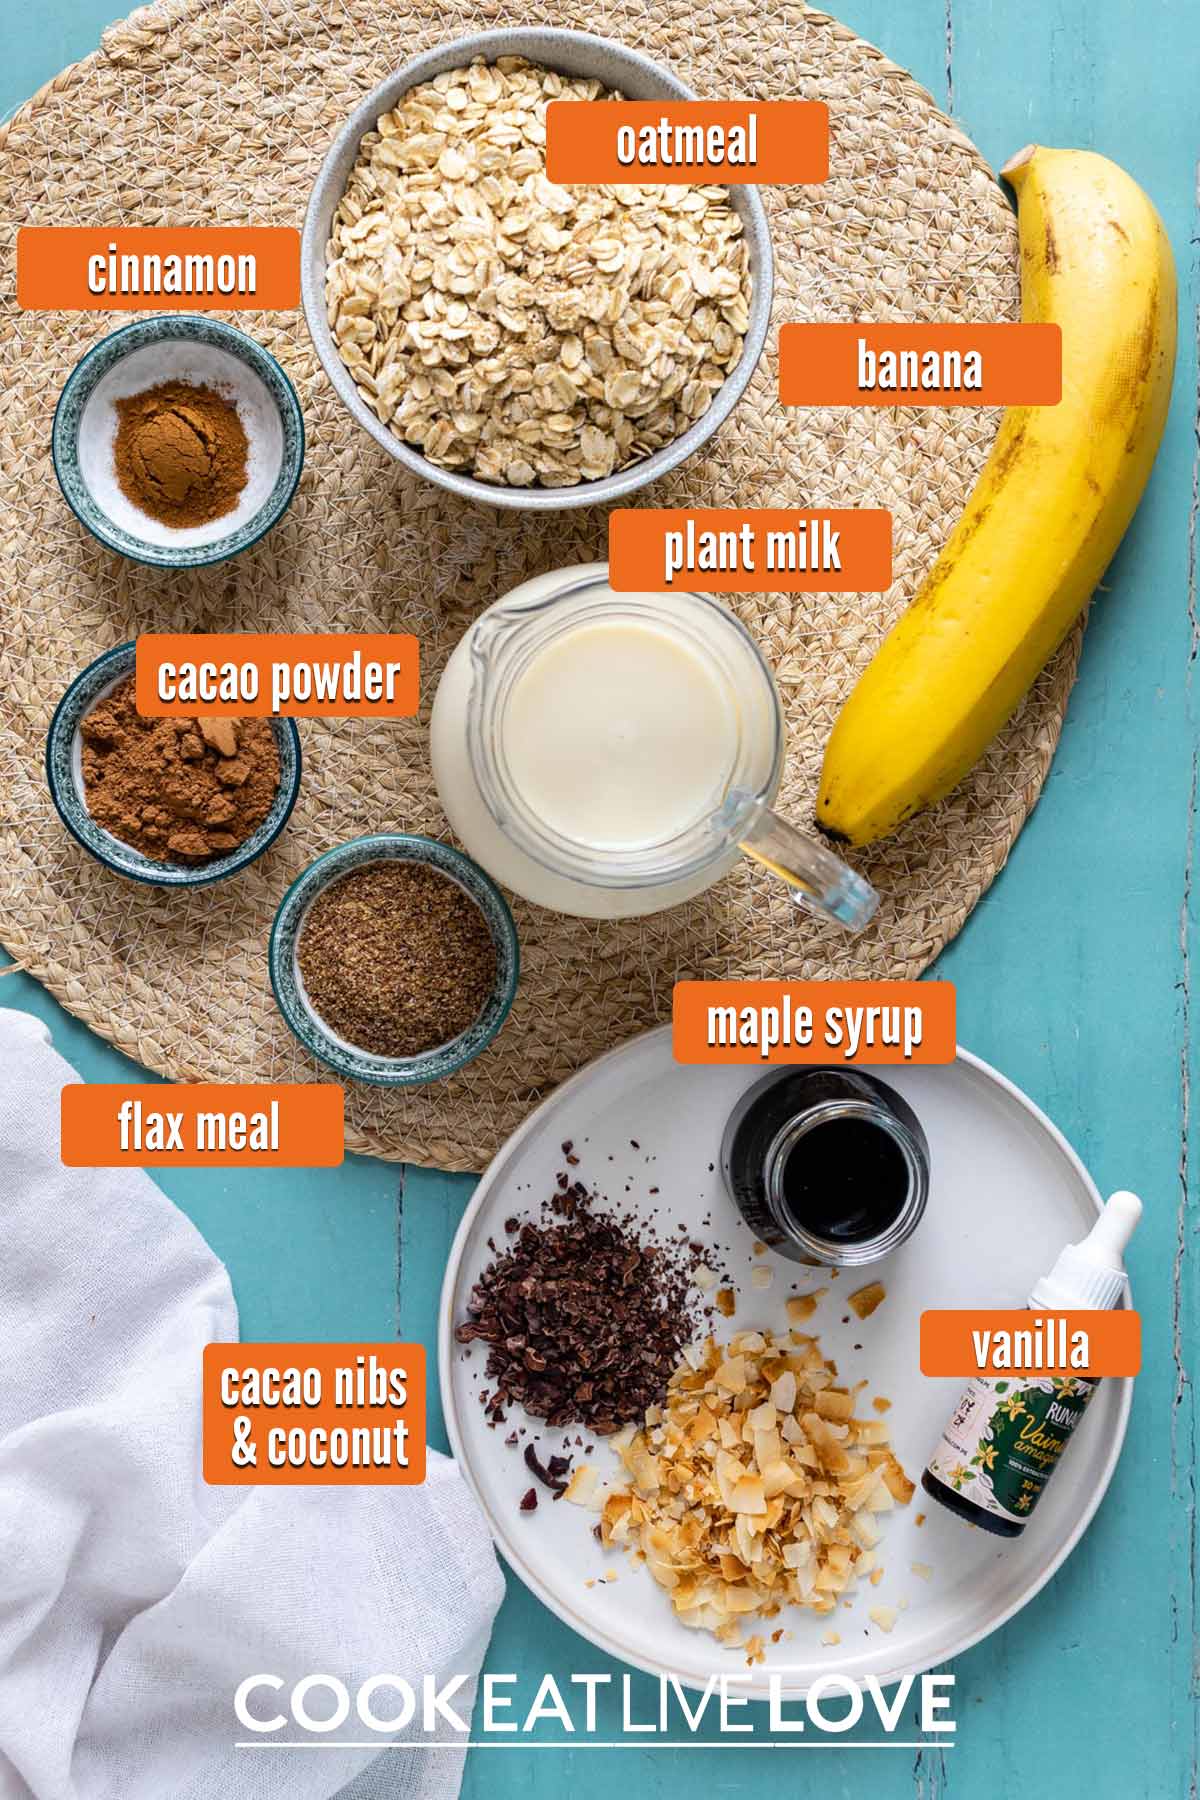 Ingredients to make banana chocolate oatmeal on the table.